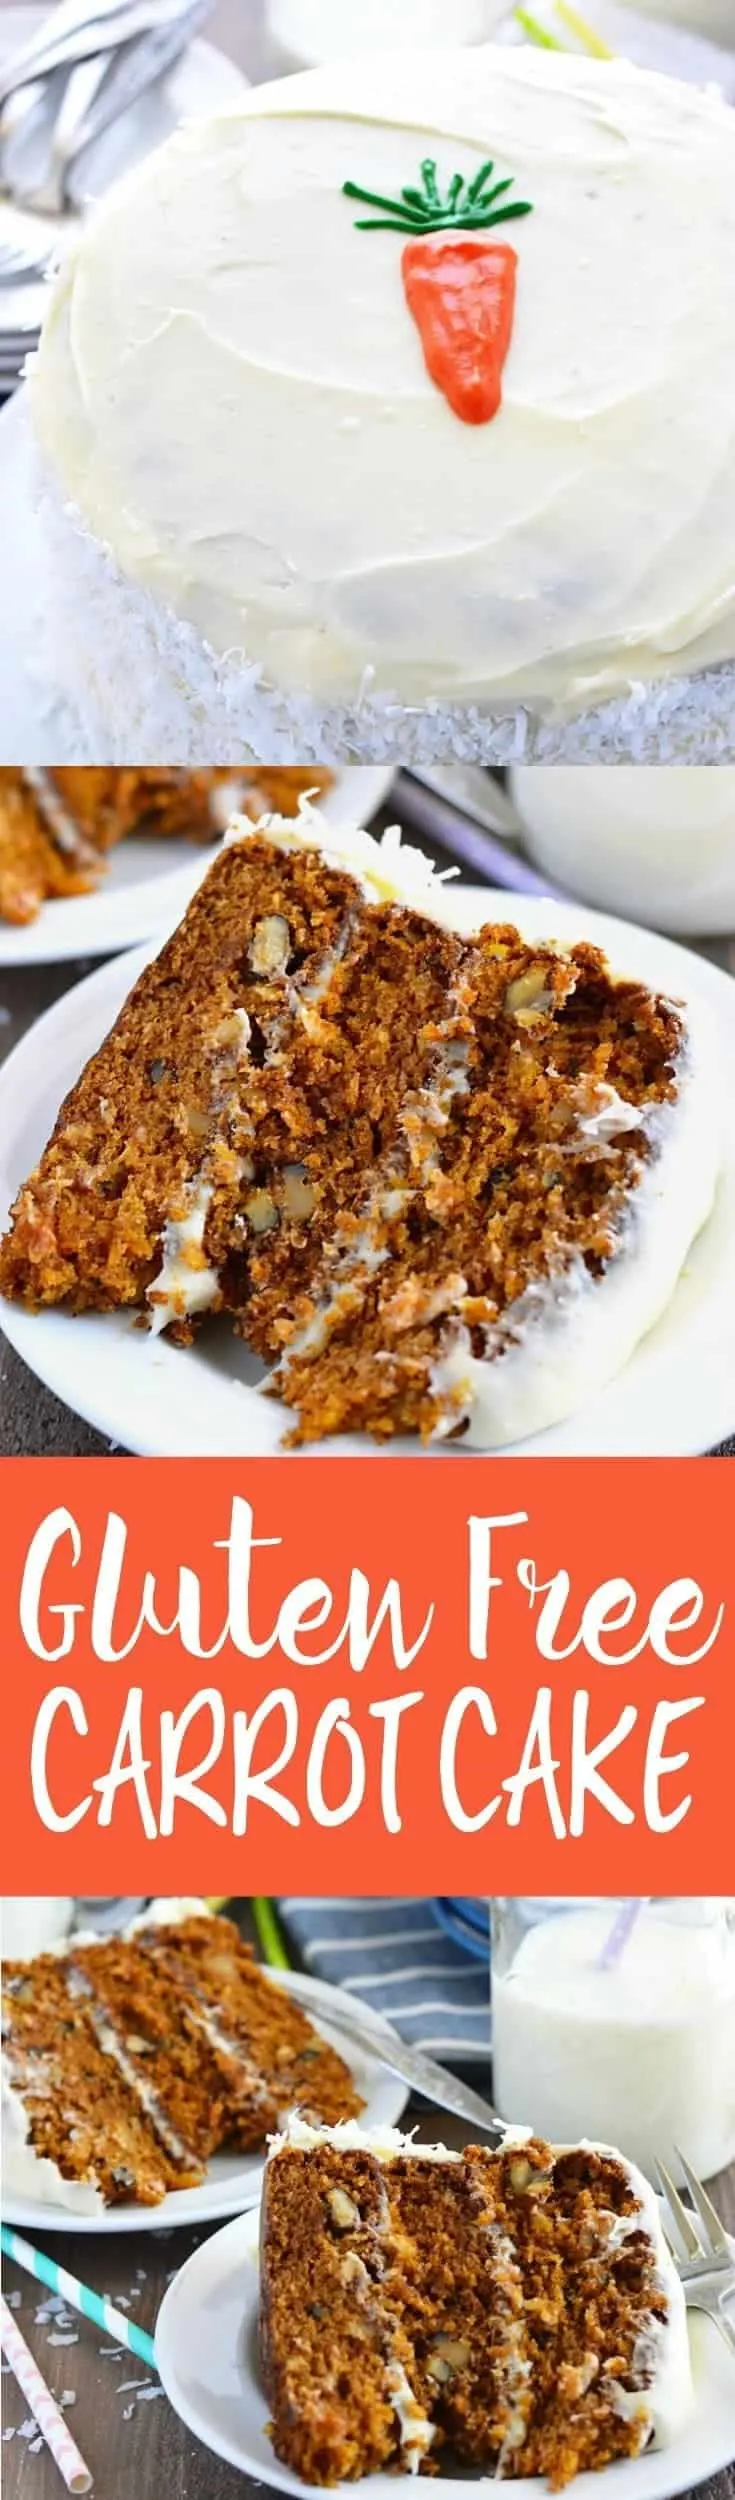 Gluten Free Carrot Cake from What The Fork Food Blog | whattheforkfoodblog.com